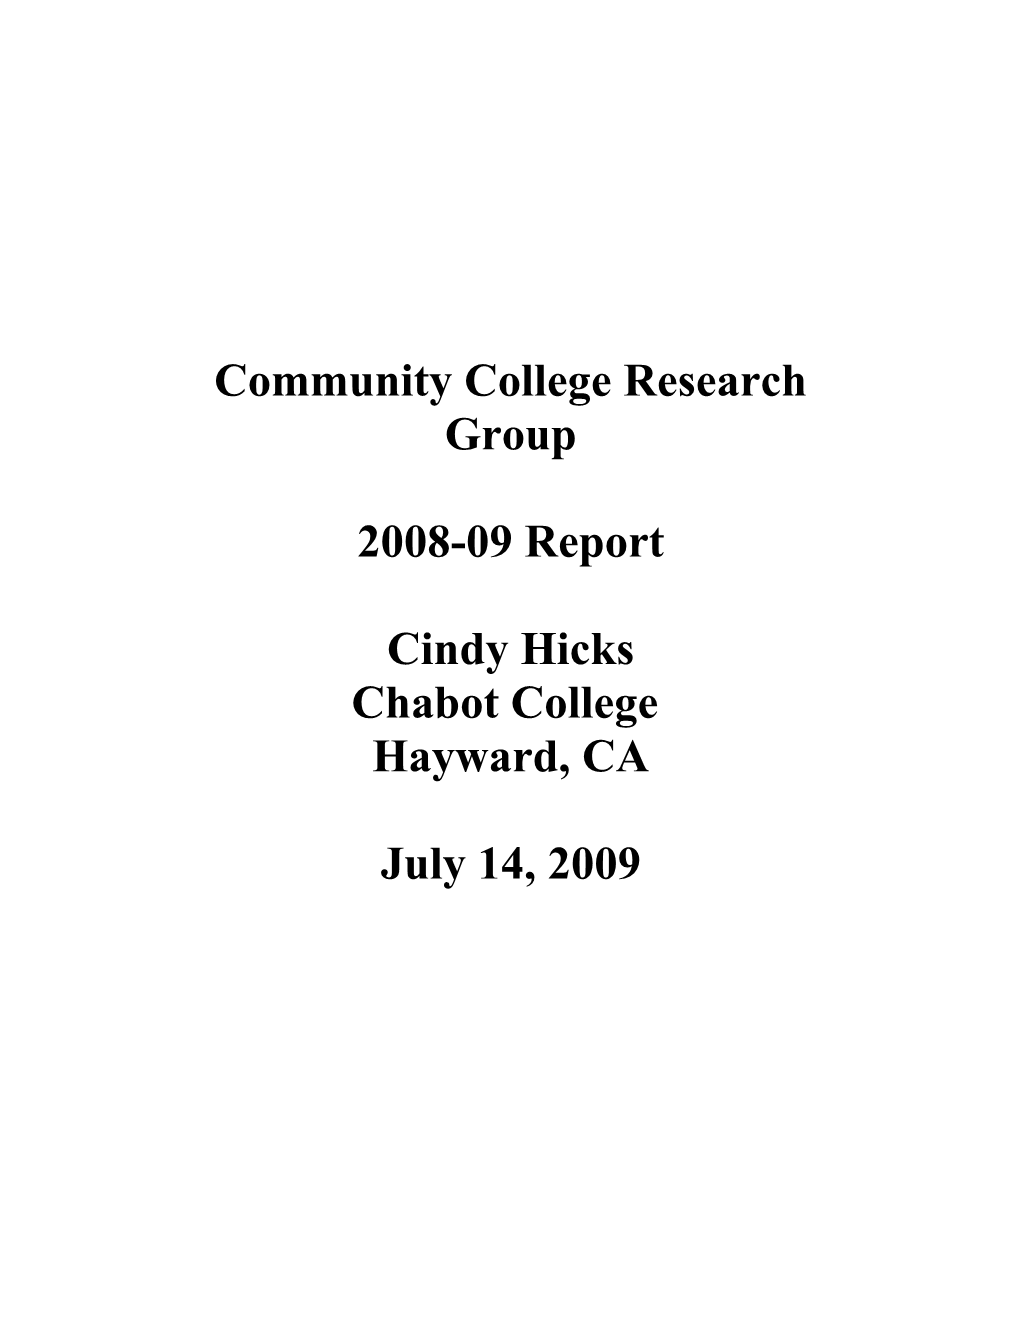 Community College Research Group